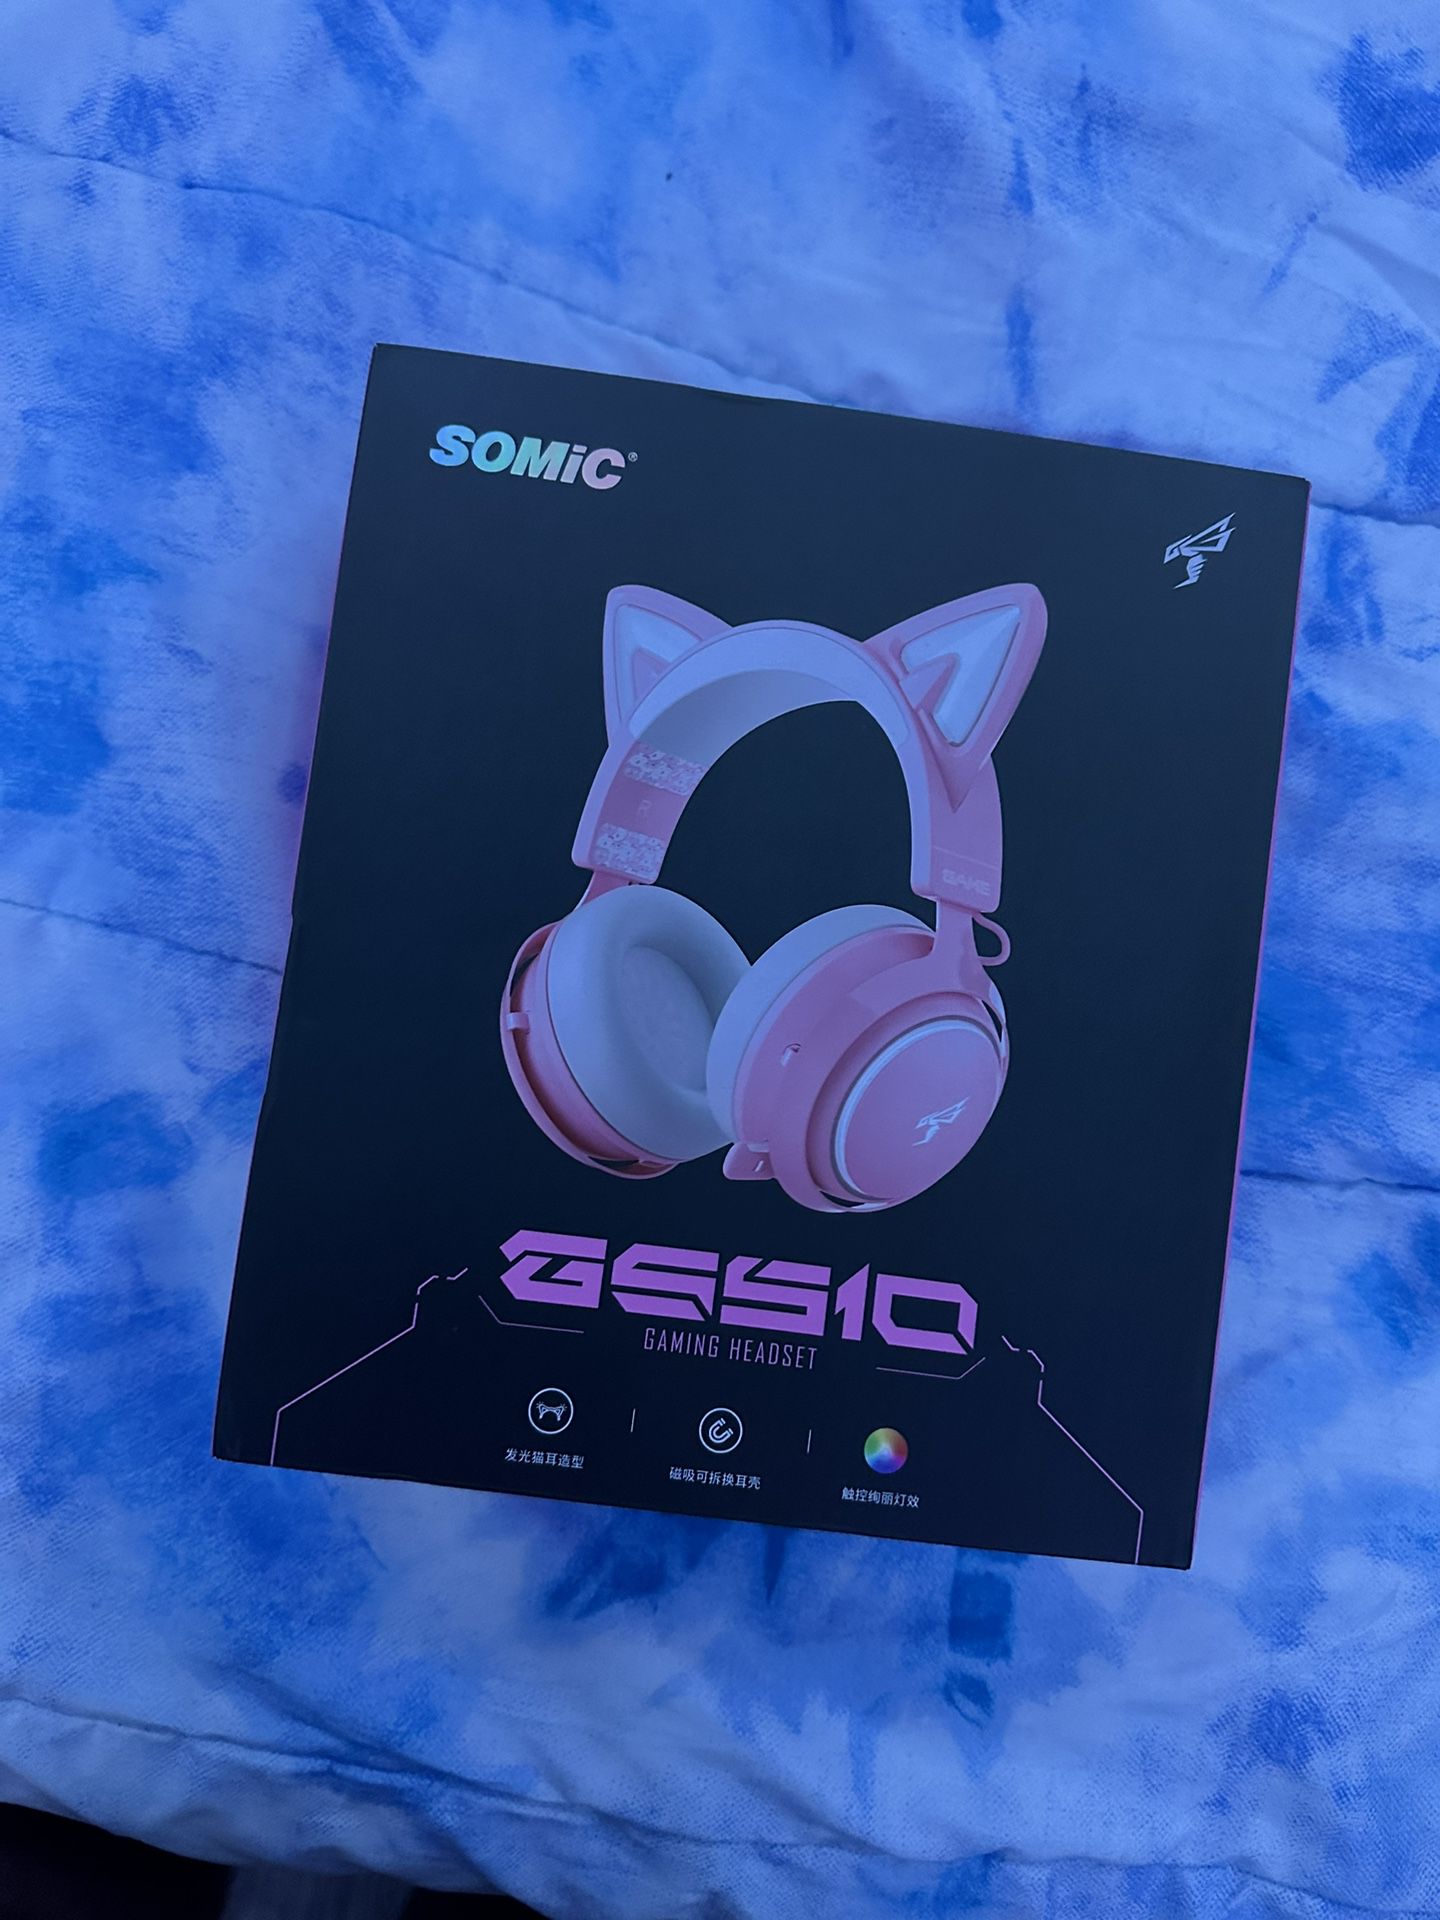 Simic GSS10 gaming Headset